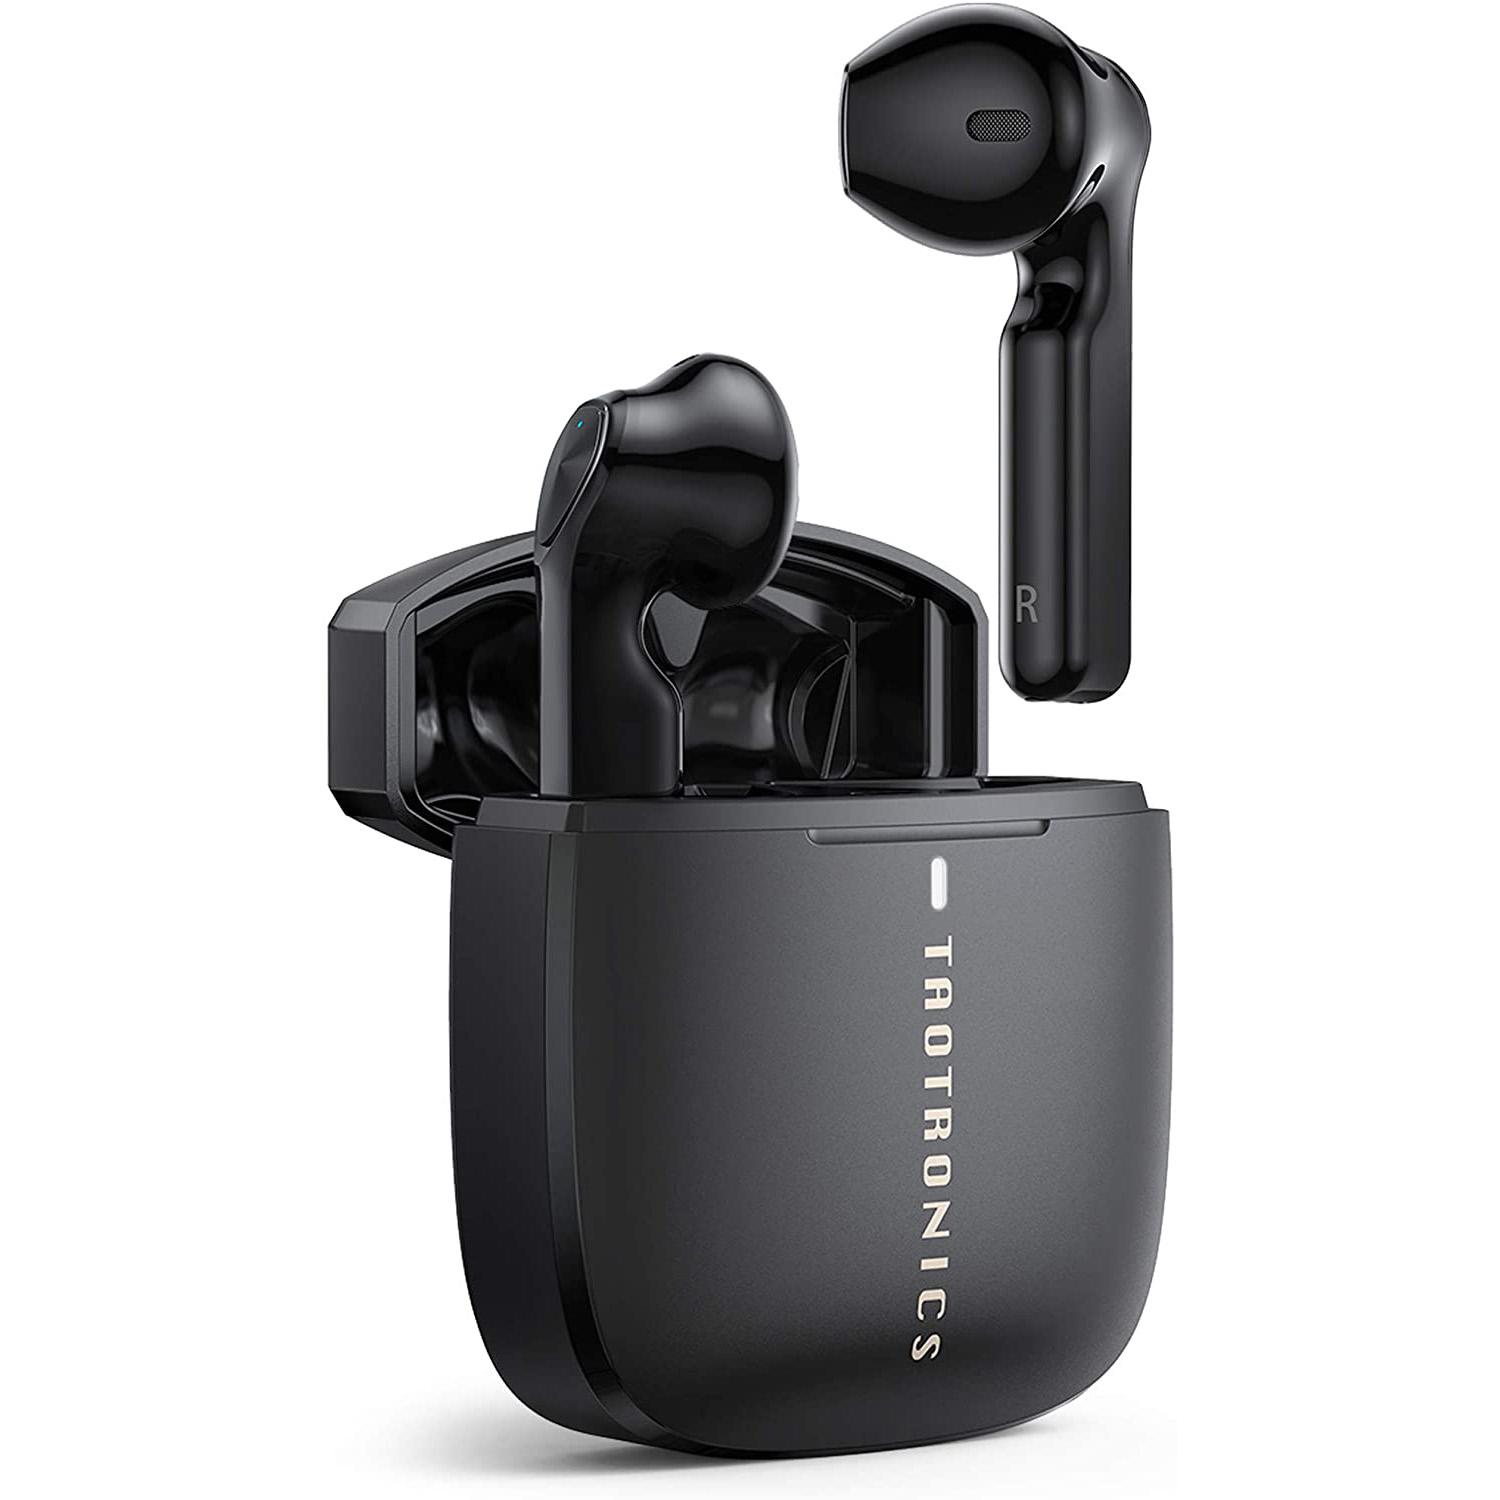 TaoTronics SoundLiberty 92 Bluetooth 5.0 Earbuds for $27.99 Shipped